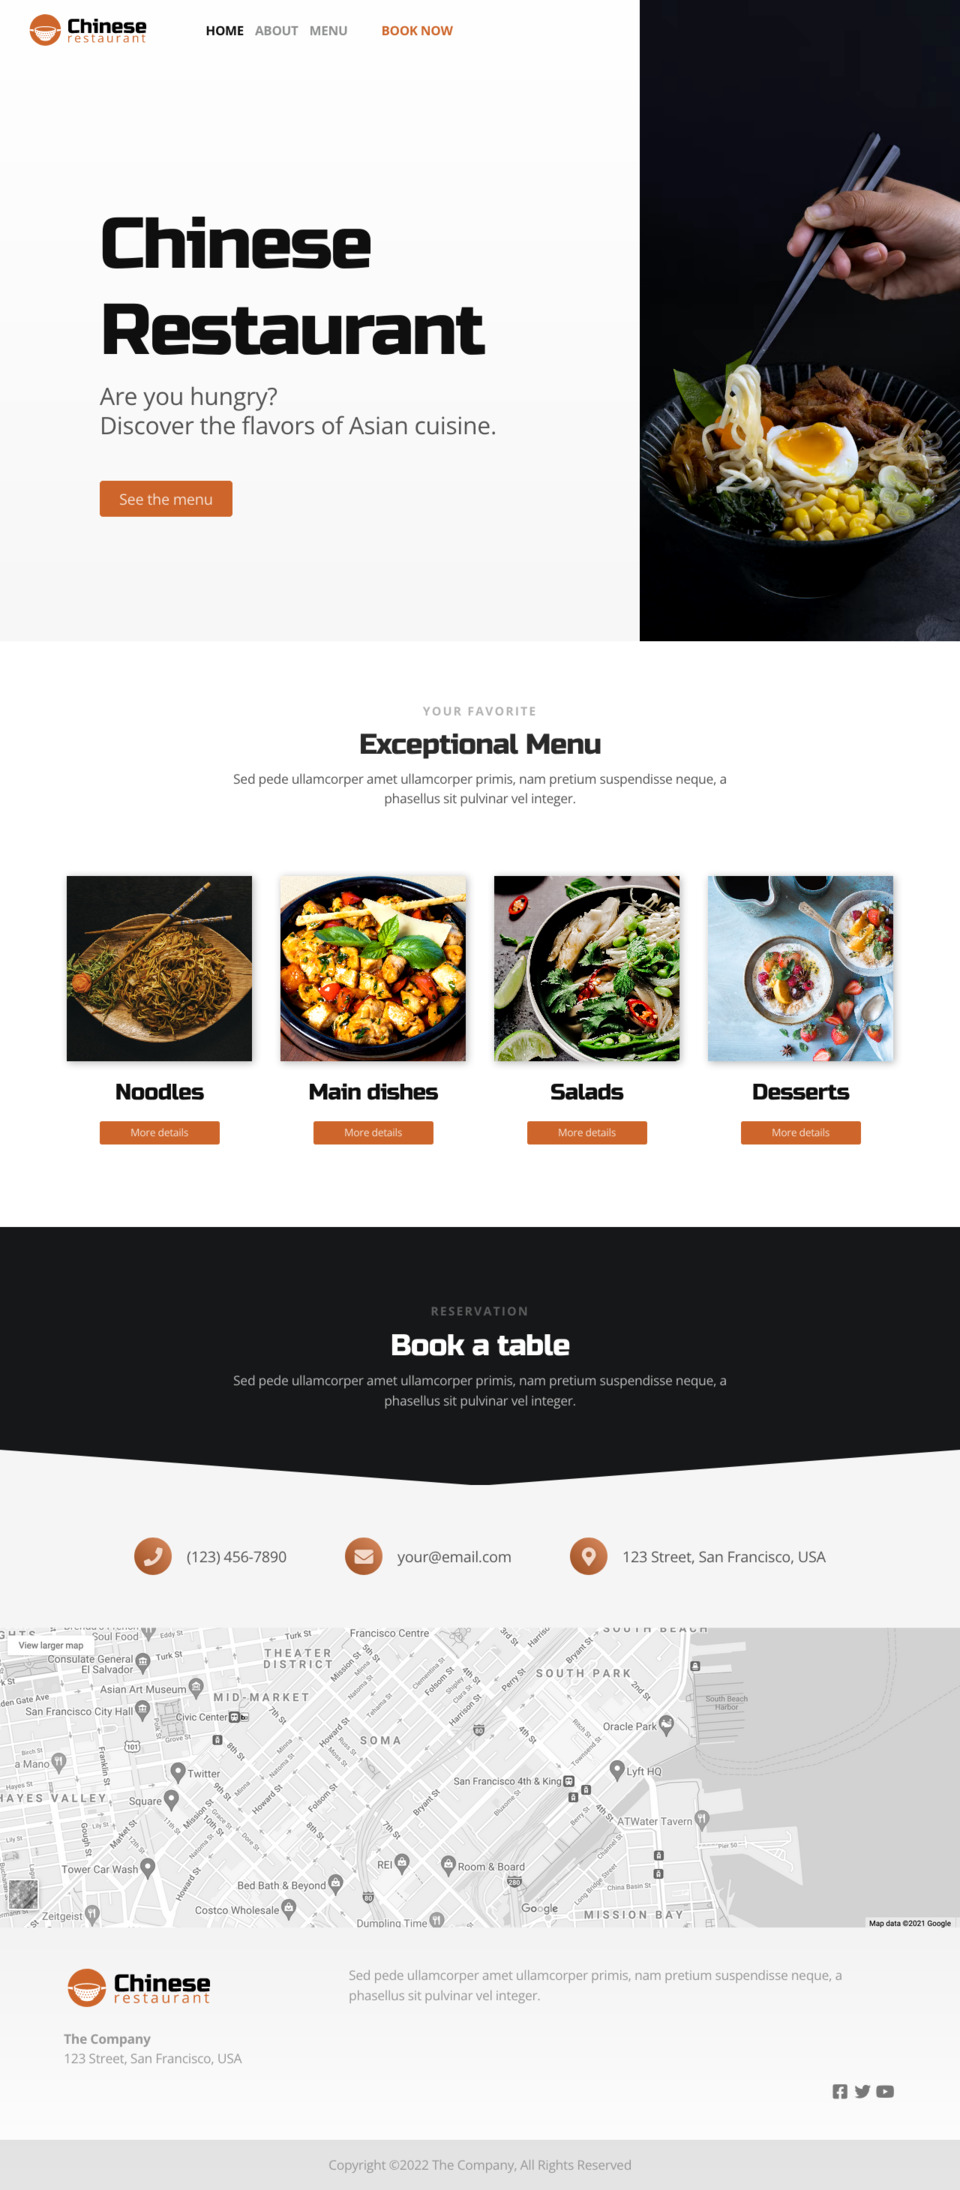 Chinese Restaurant Website Template - Perfect for small businesses, restaurants, diners, and anyone looking for an easy-to-use website builder.